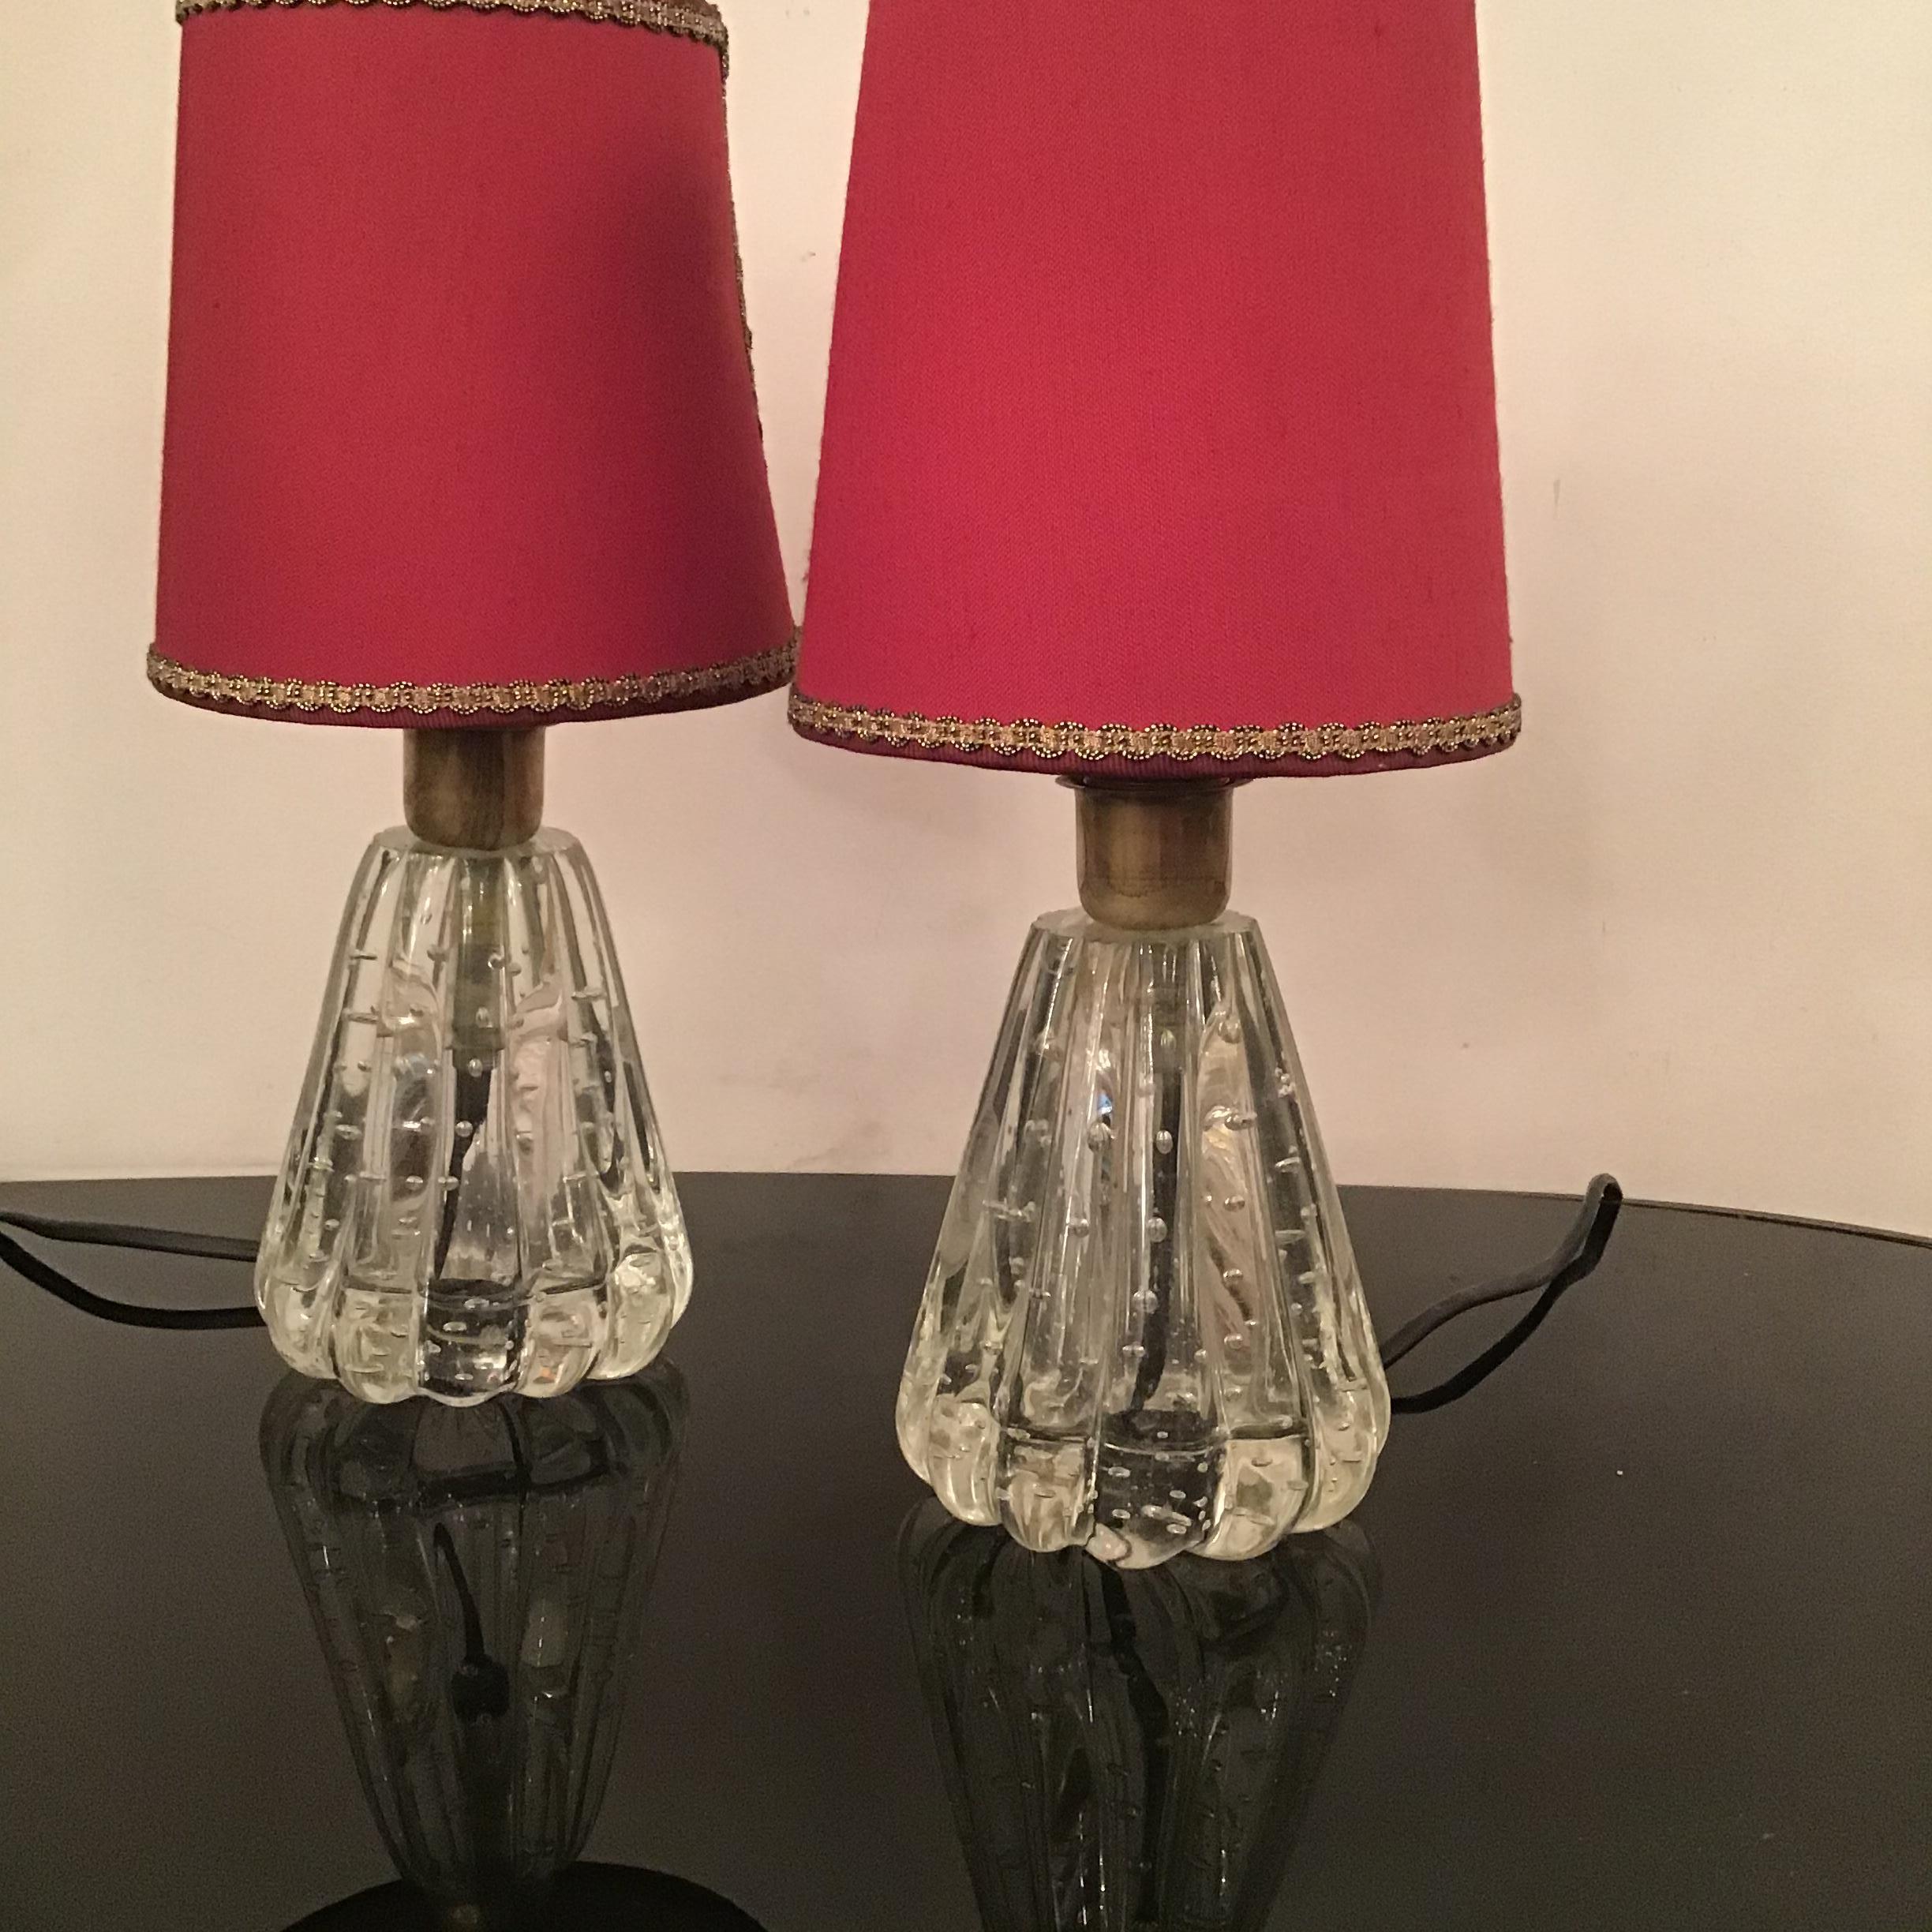 Barovier e Toso Table Lamps Murano Glass Brass Fabric Lampshade 1940 Italy For Sale 9